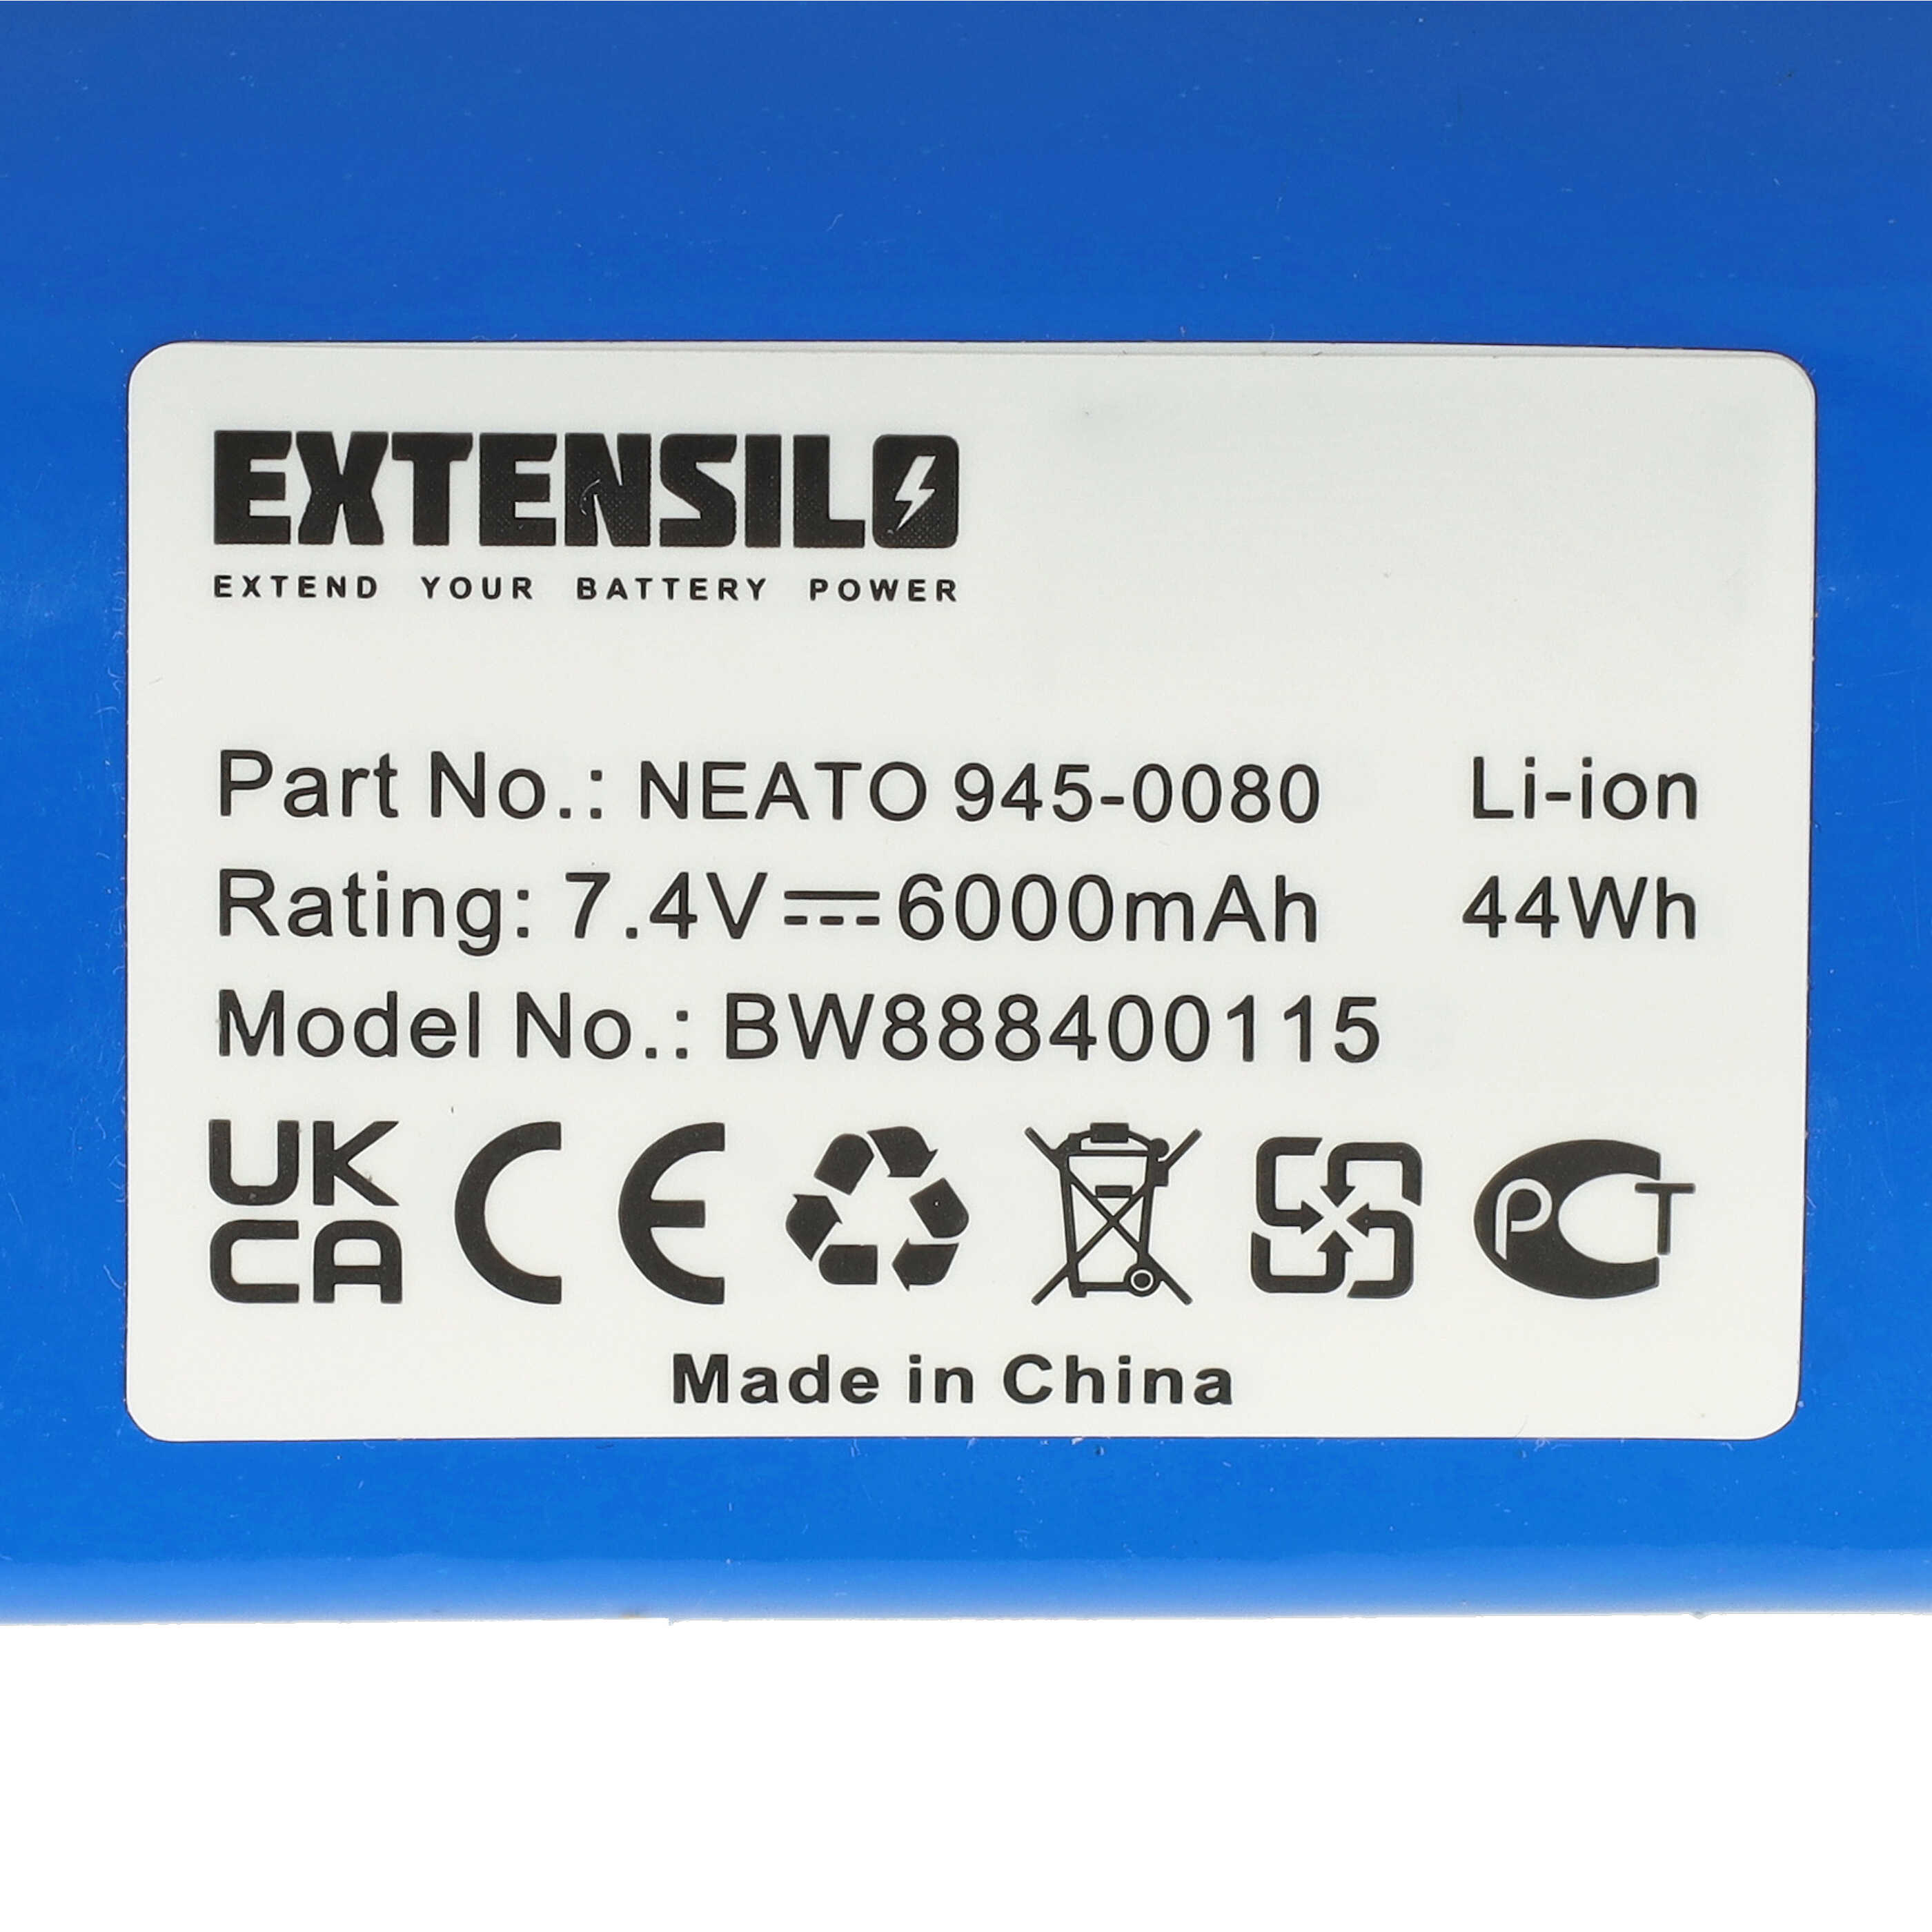 Battery (2 Units) Replacement for Neato 945-0024, 945-0006, 205-0001, 945-0005 for - 6000mAh, 7.4V, Li-Ion